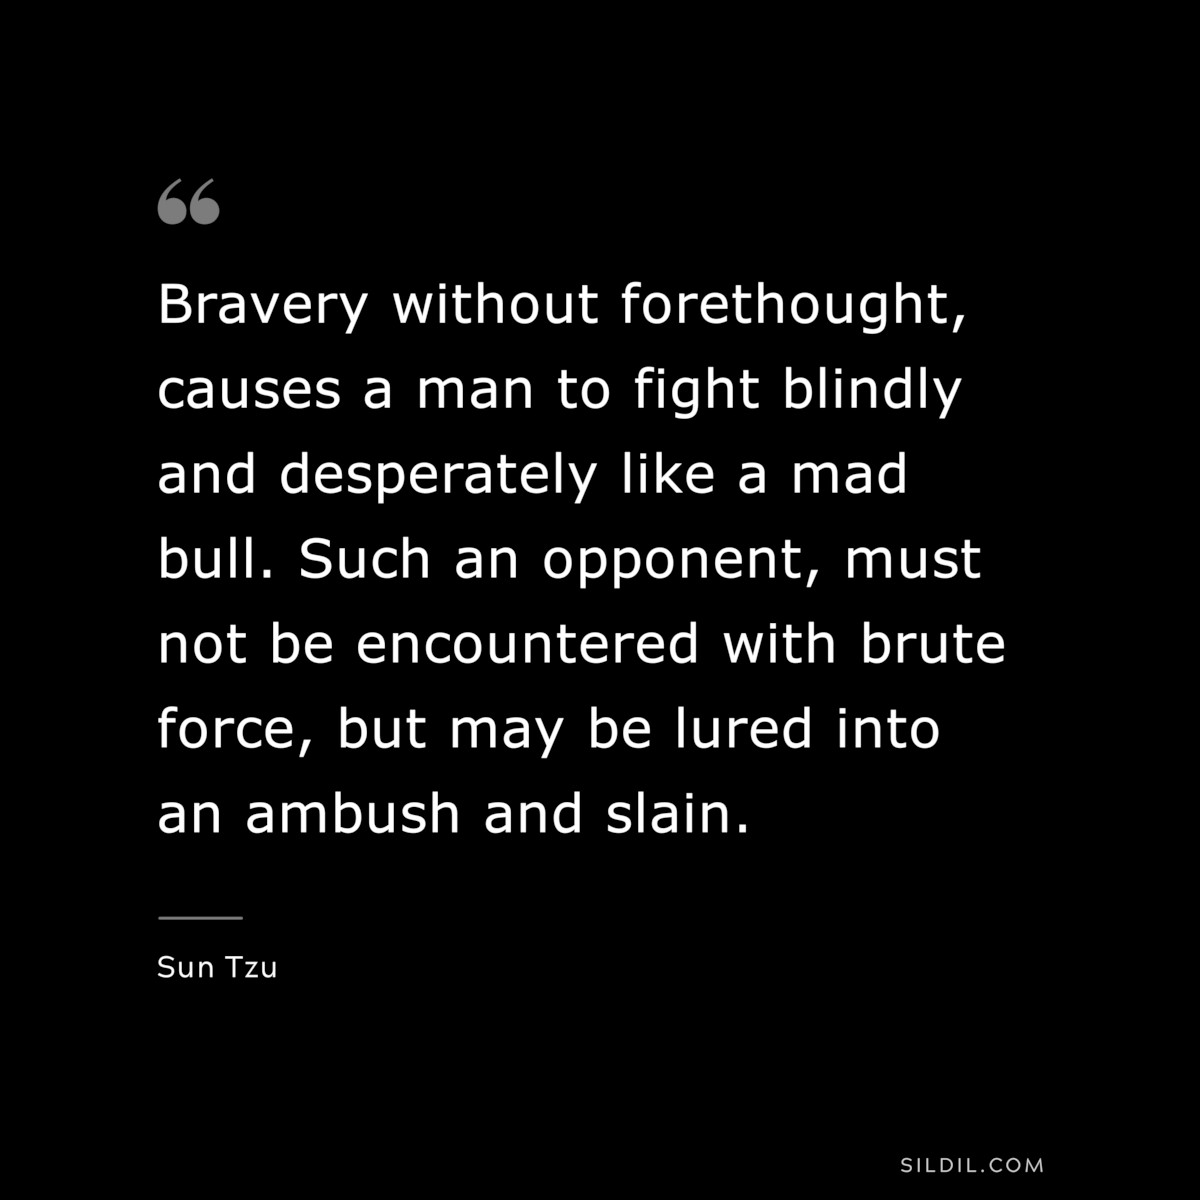 Bravery without forethought, causes a man to fight blindly and desperately like a mad bull. Such an opponent, must not be encountered with brute force, but may be lured into an ambush and slain.― Sun Tzu